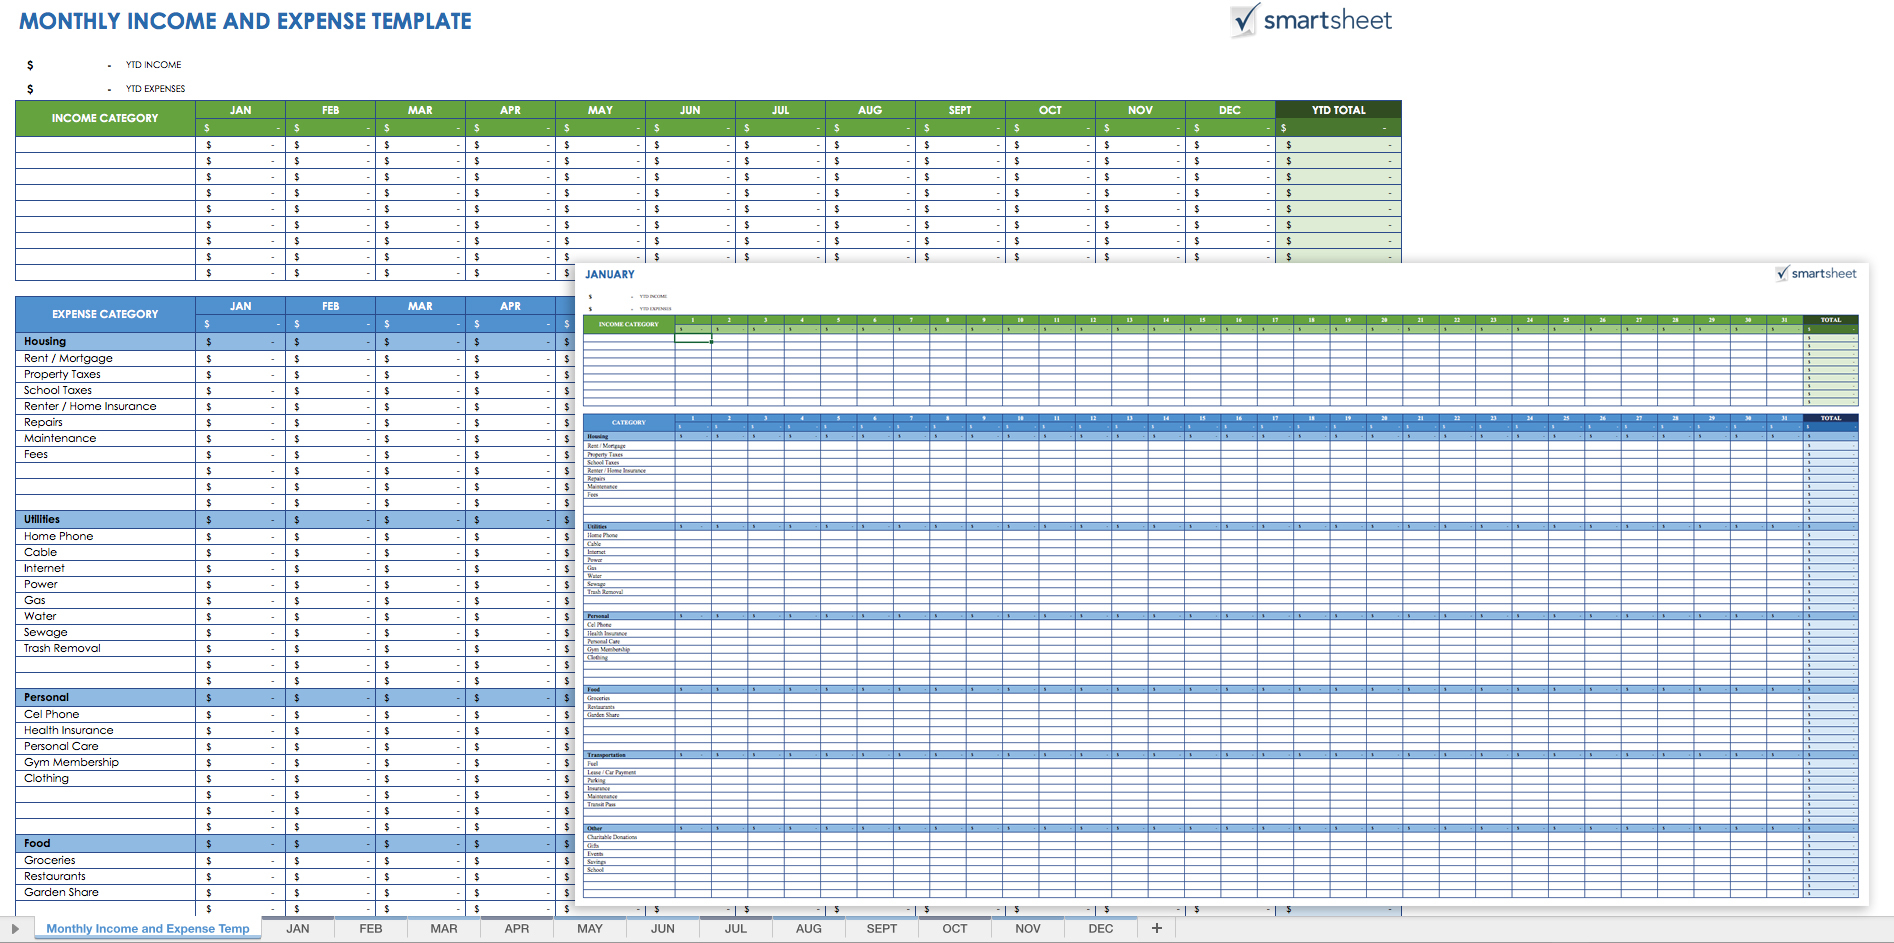 Free Accounting Spreadsheet Templates For Small Business within Free Accounting Spreadsheets For Small Business